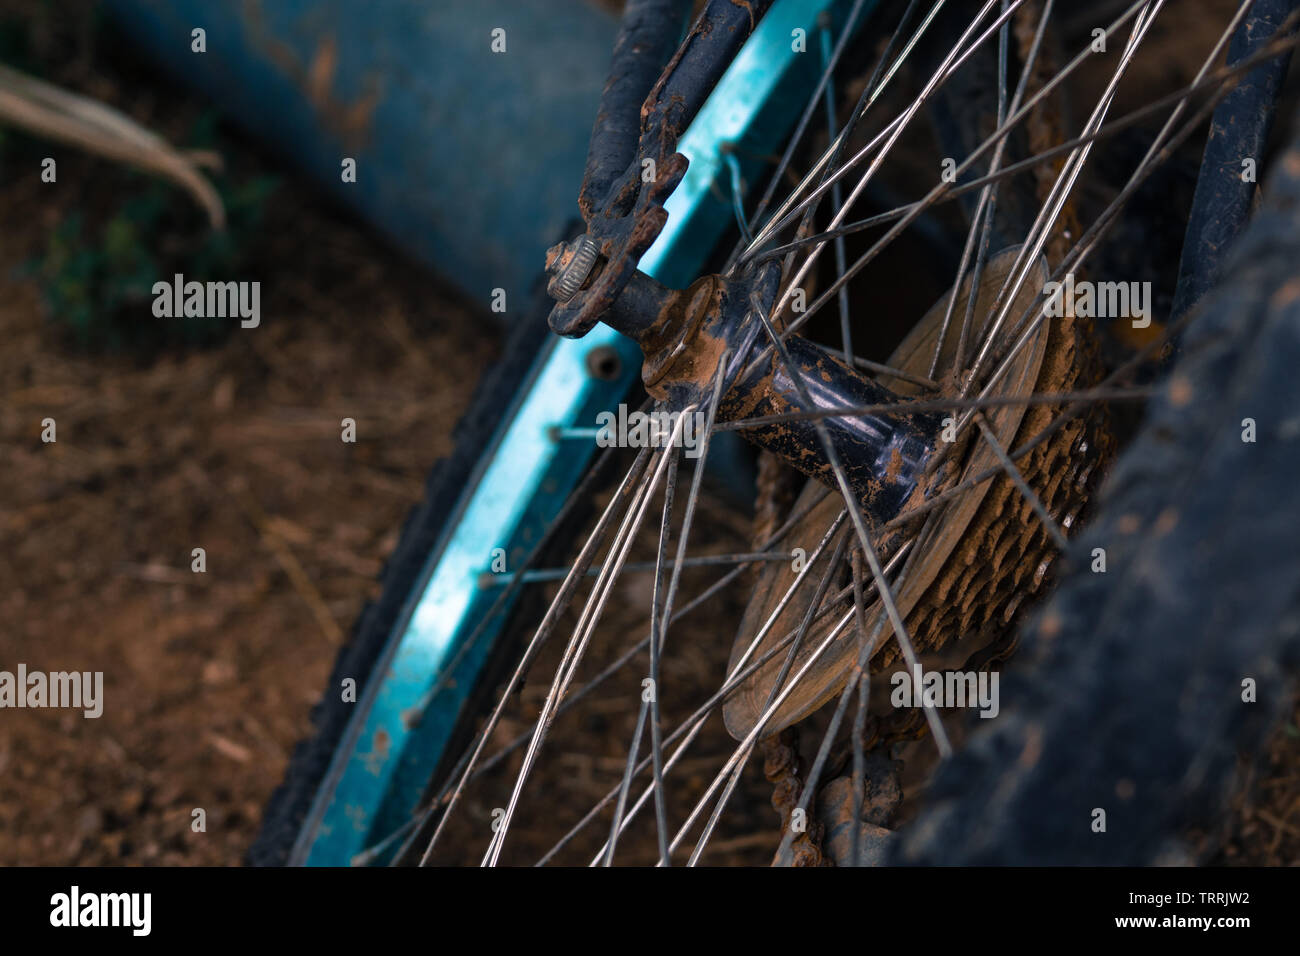 Rust accumulating on Bicycle tire Stock Photo